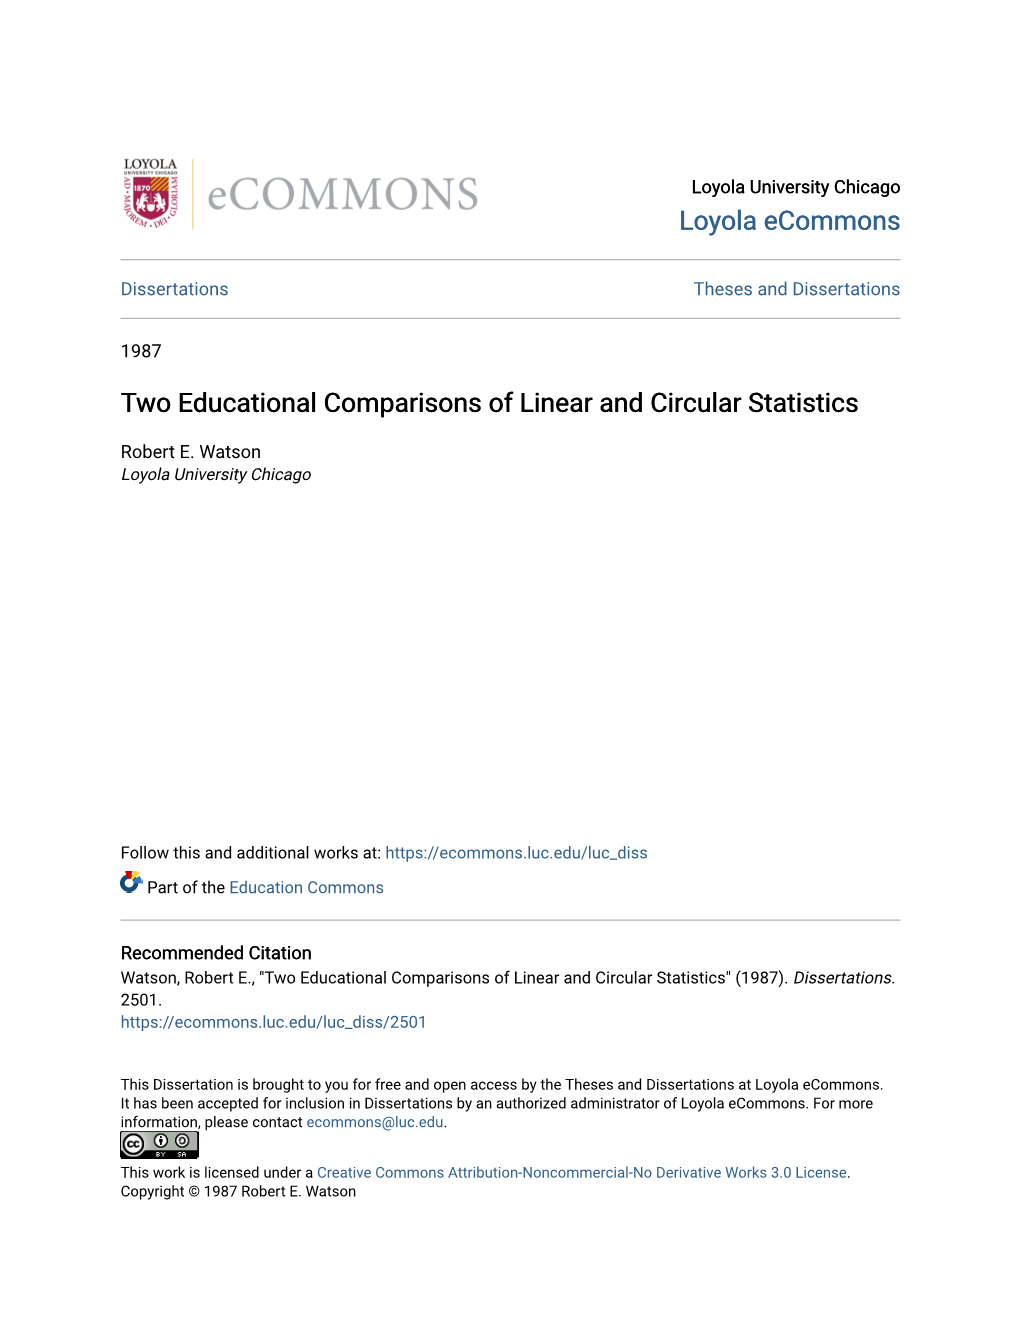 Two Educational Comparisons of Linear and Circular Statistics